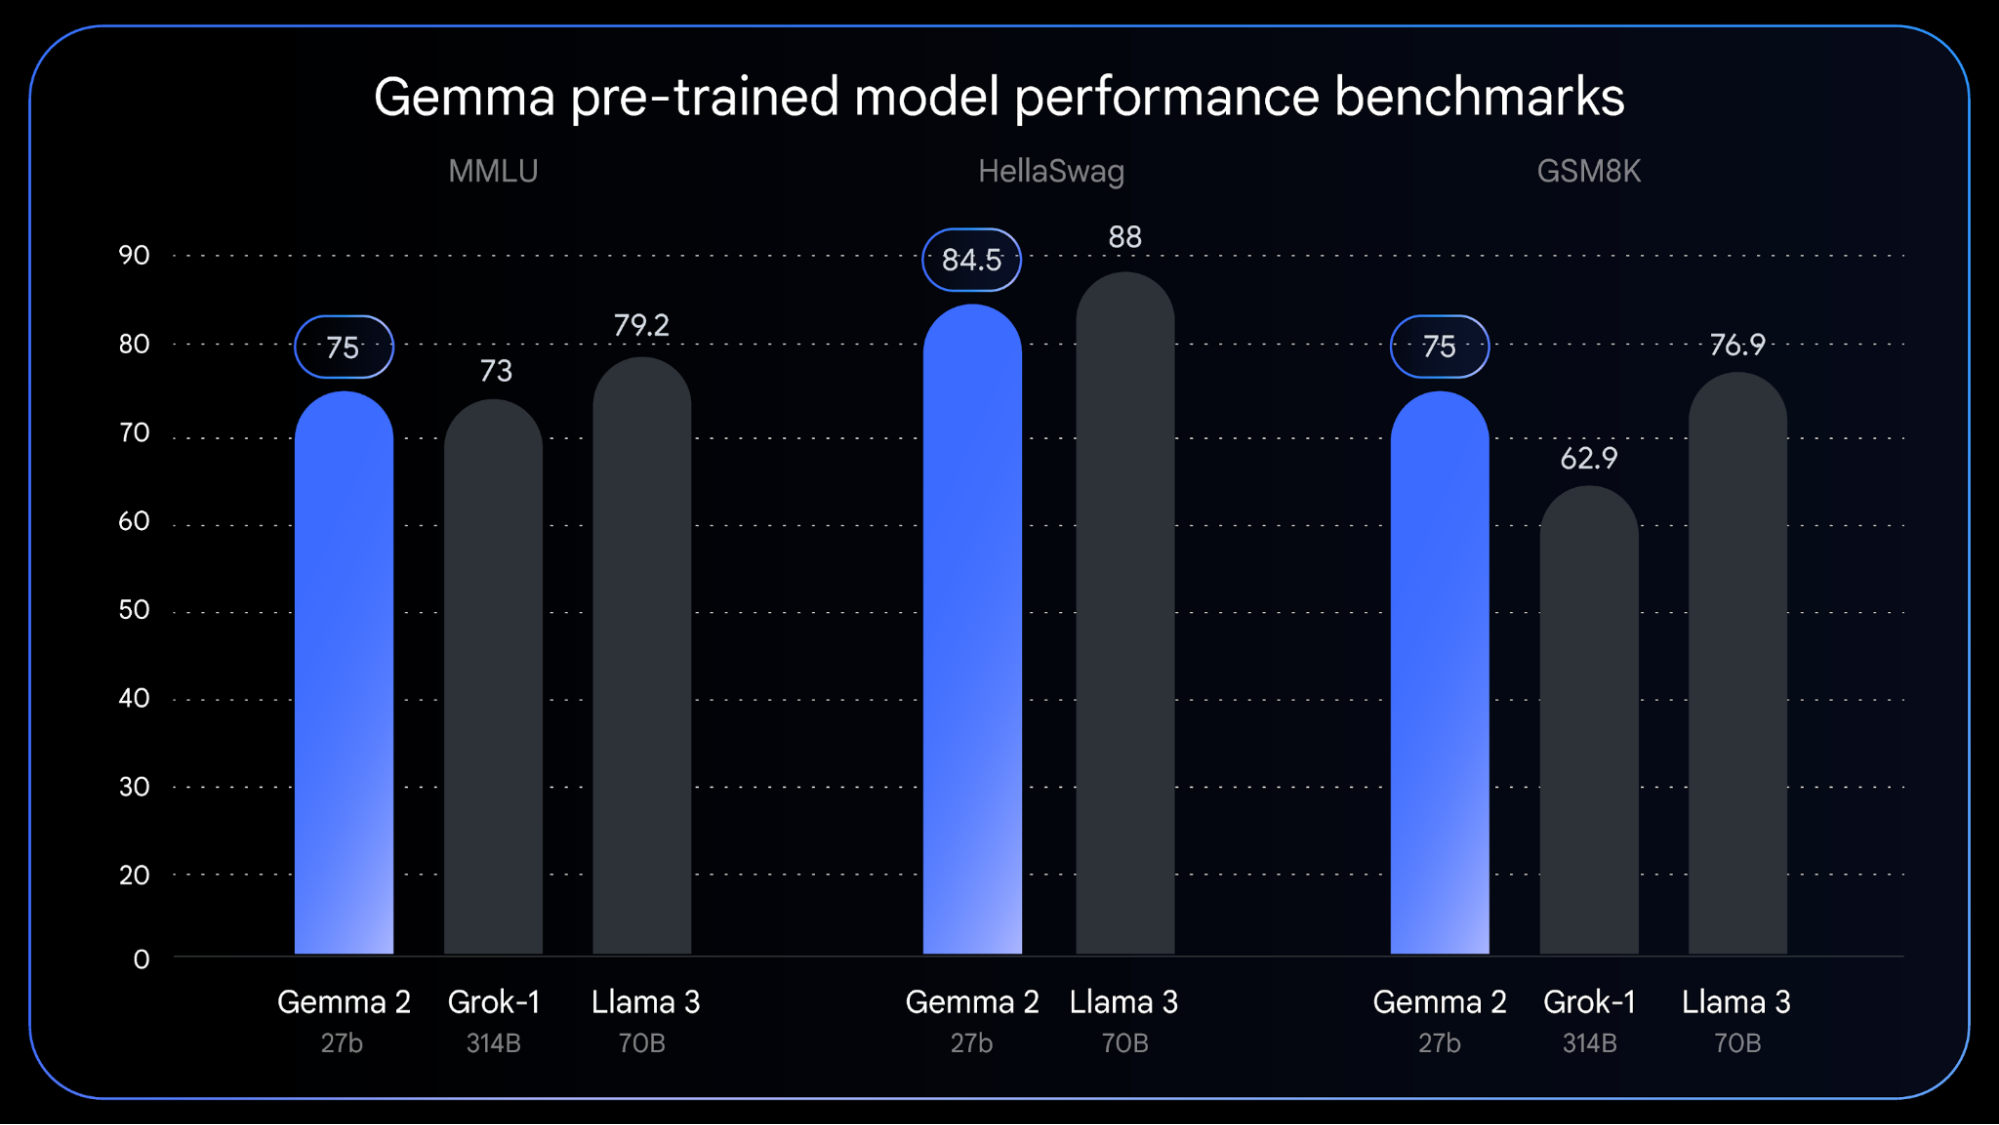 Gemma pre-trained model performance benchmarks